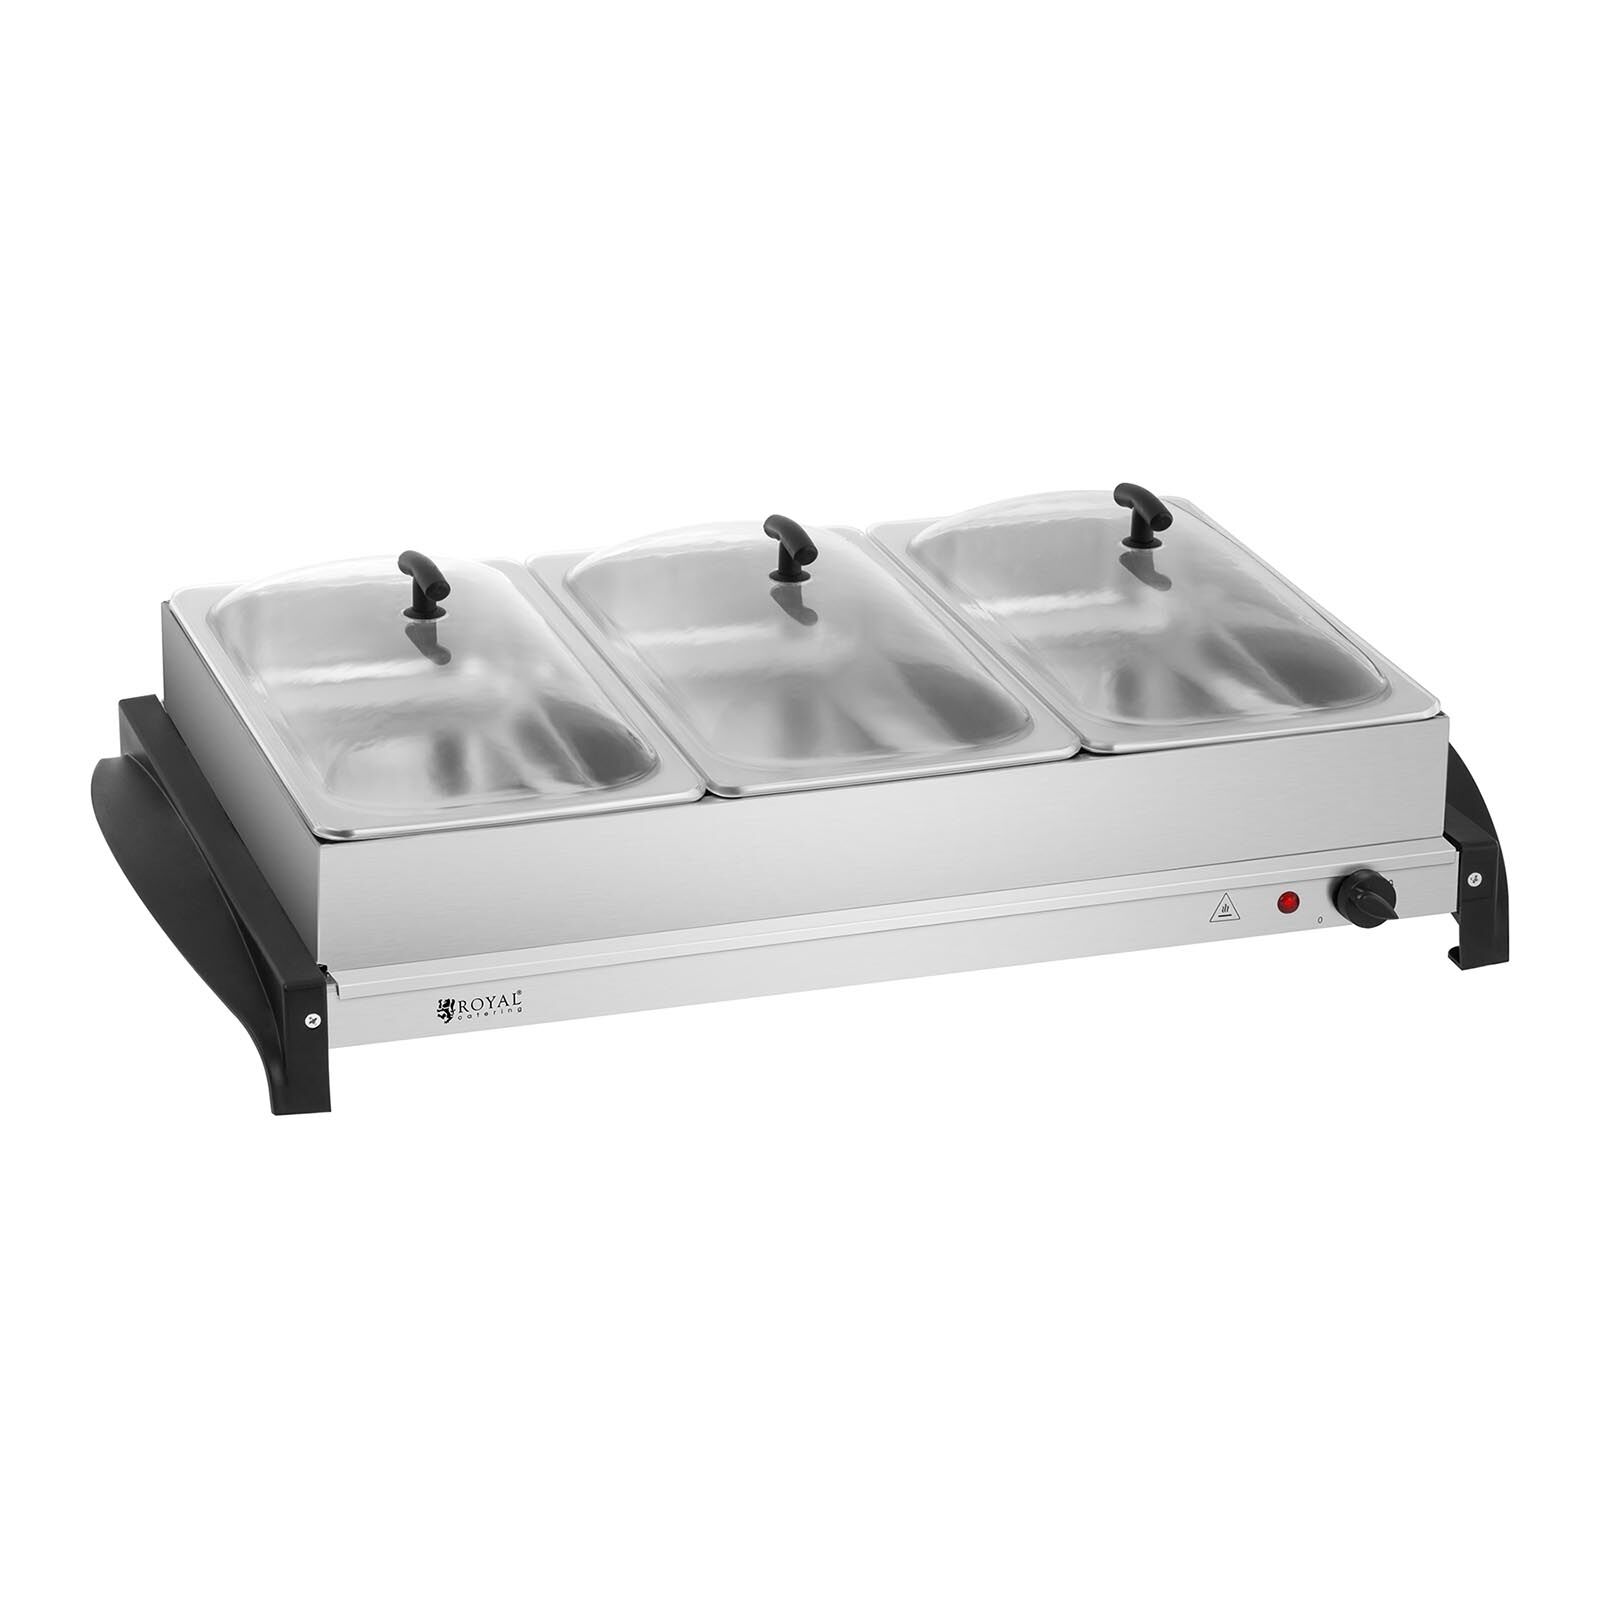 Royal Catering Chauffe-plats - 3 x 2 litres - 400 W RCHP-400/3